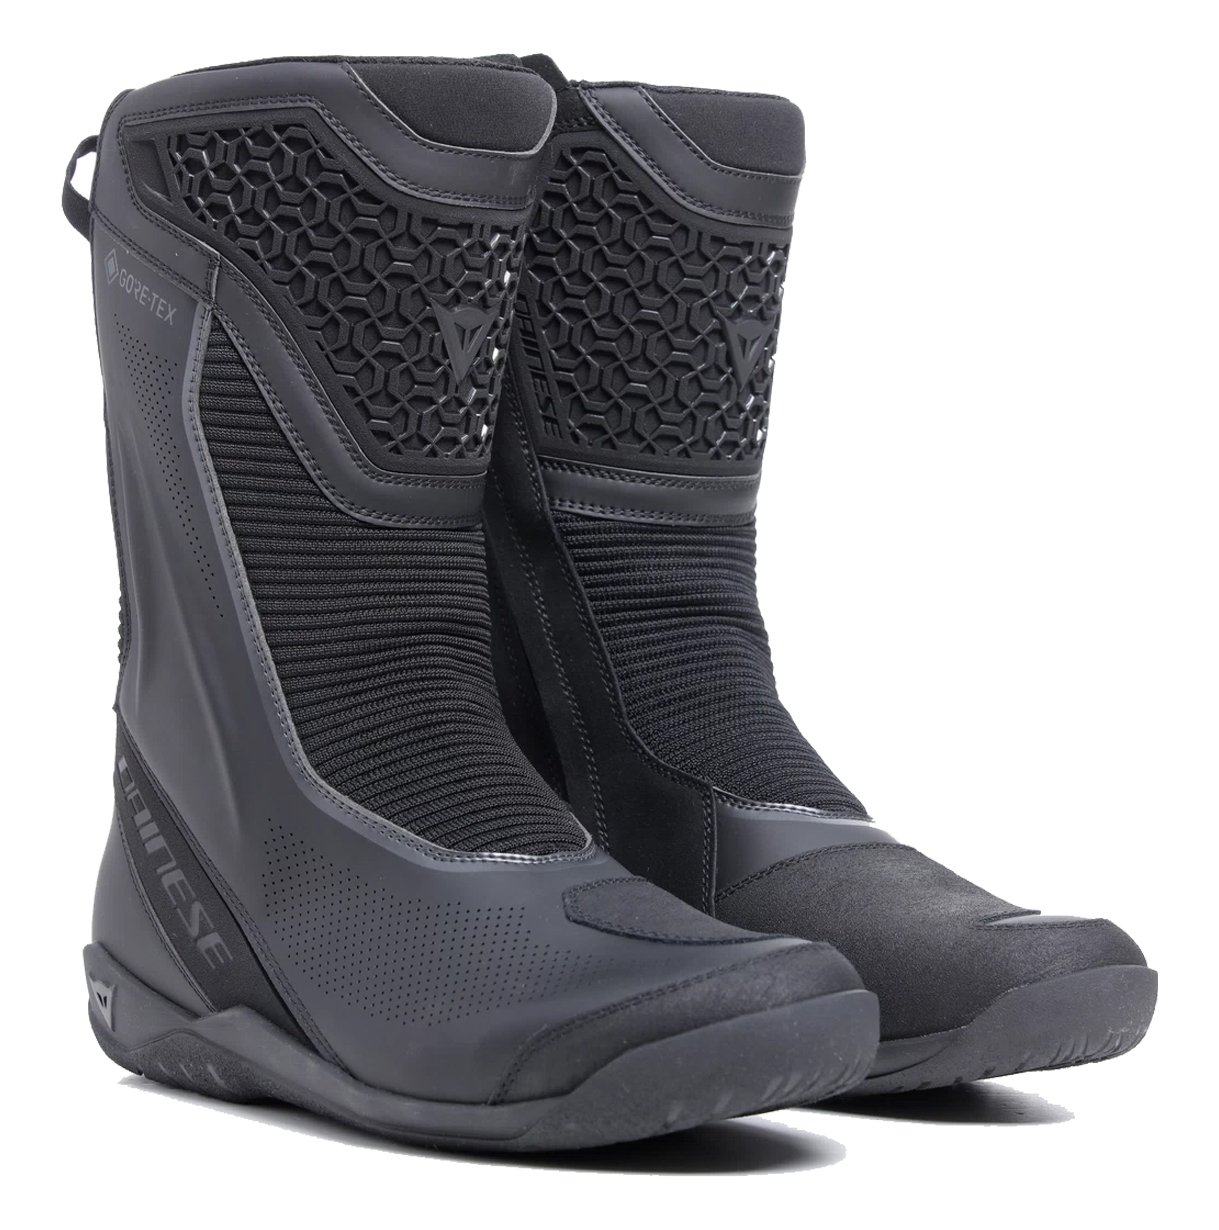 Image of Dainese Freeland 2 Gore-Tex Boots Black Talla 41